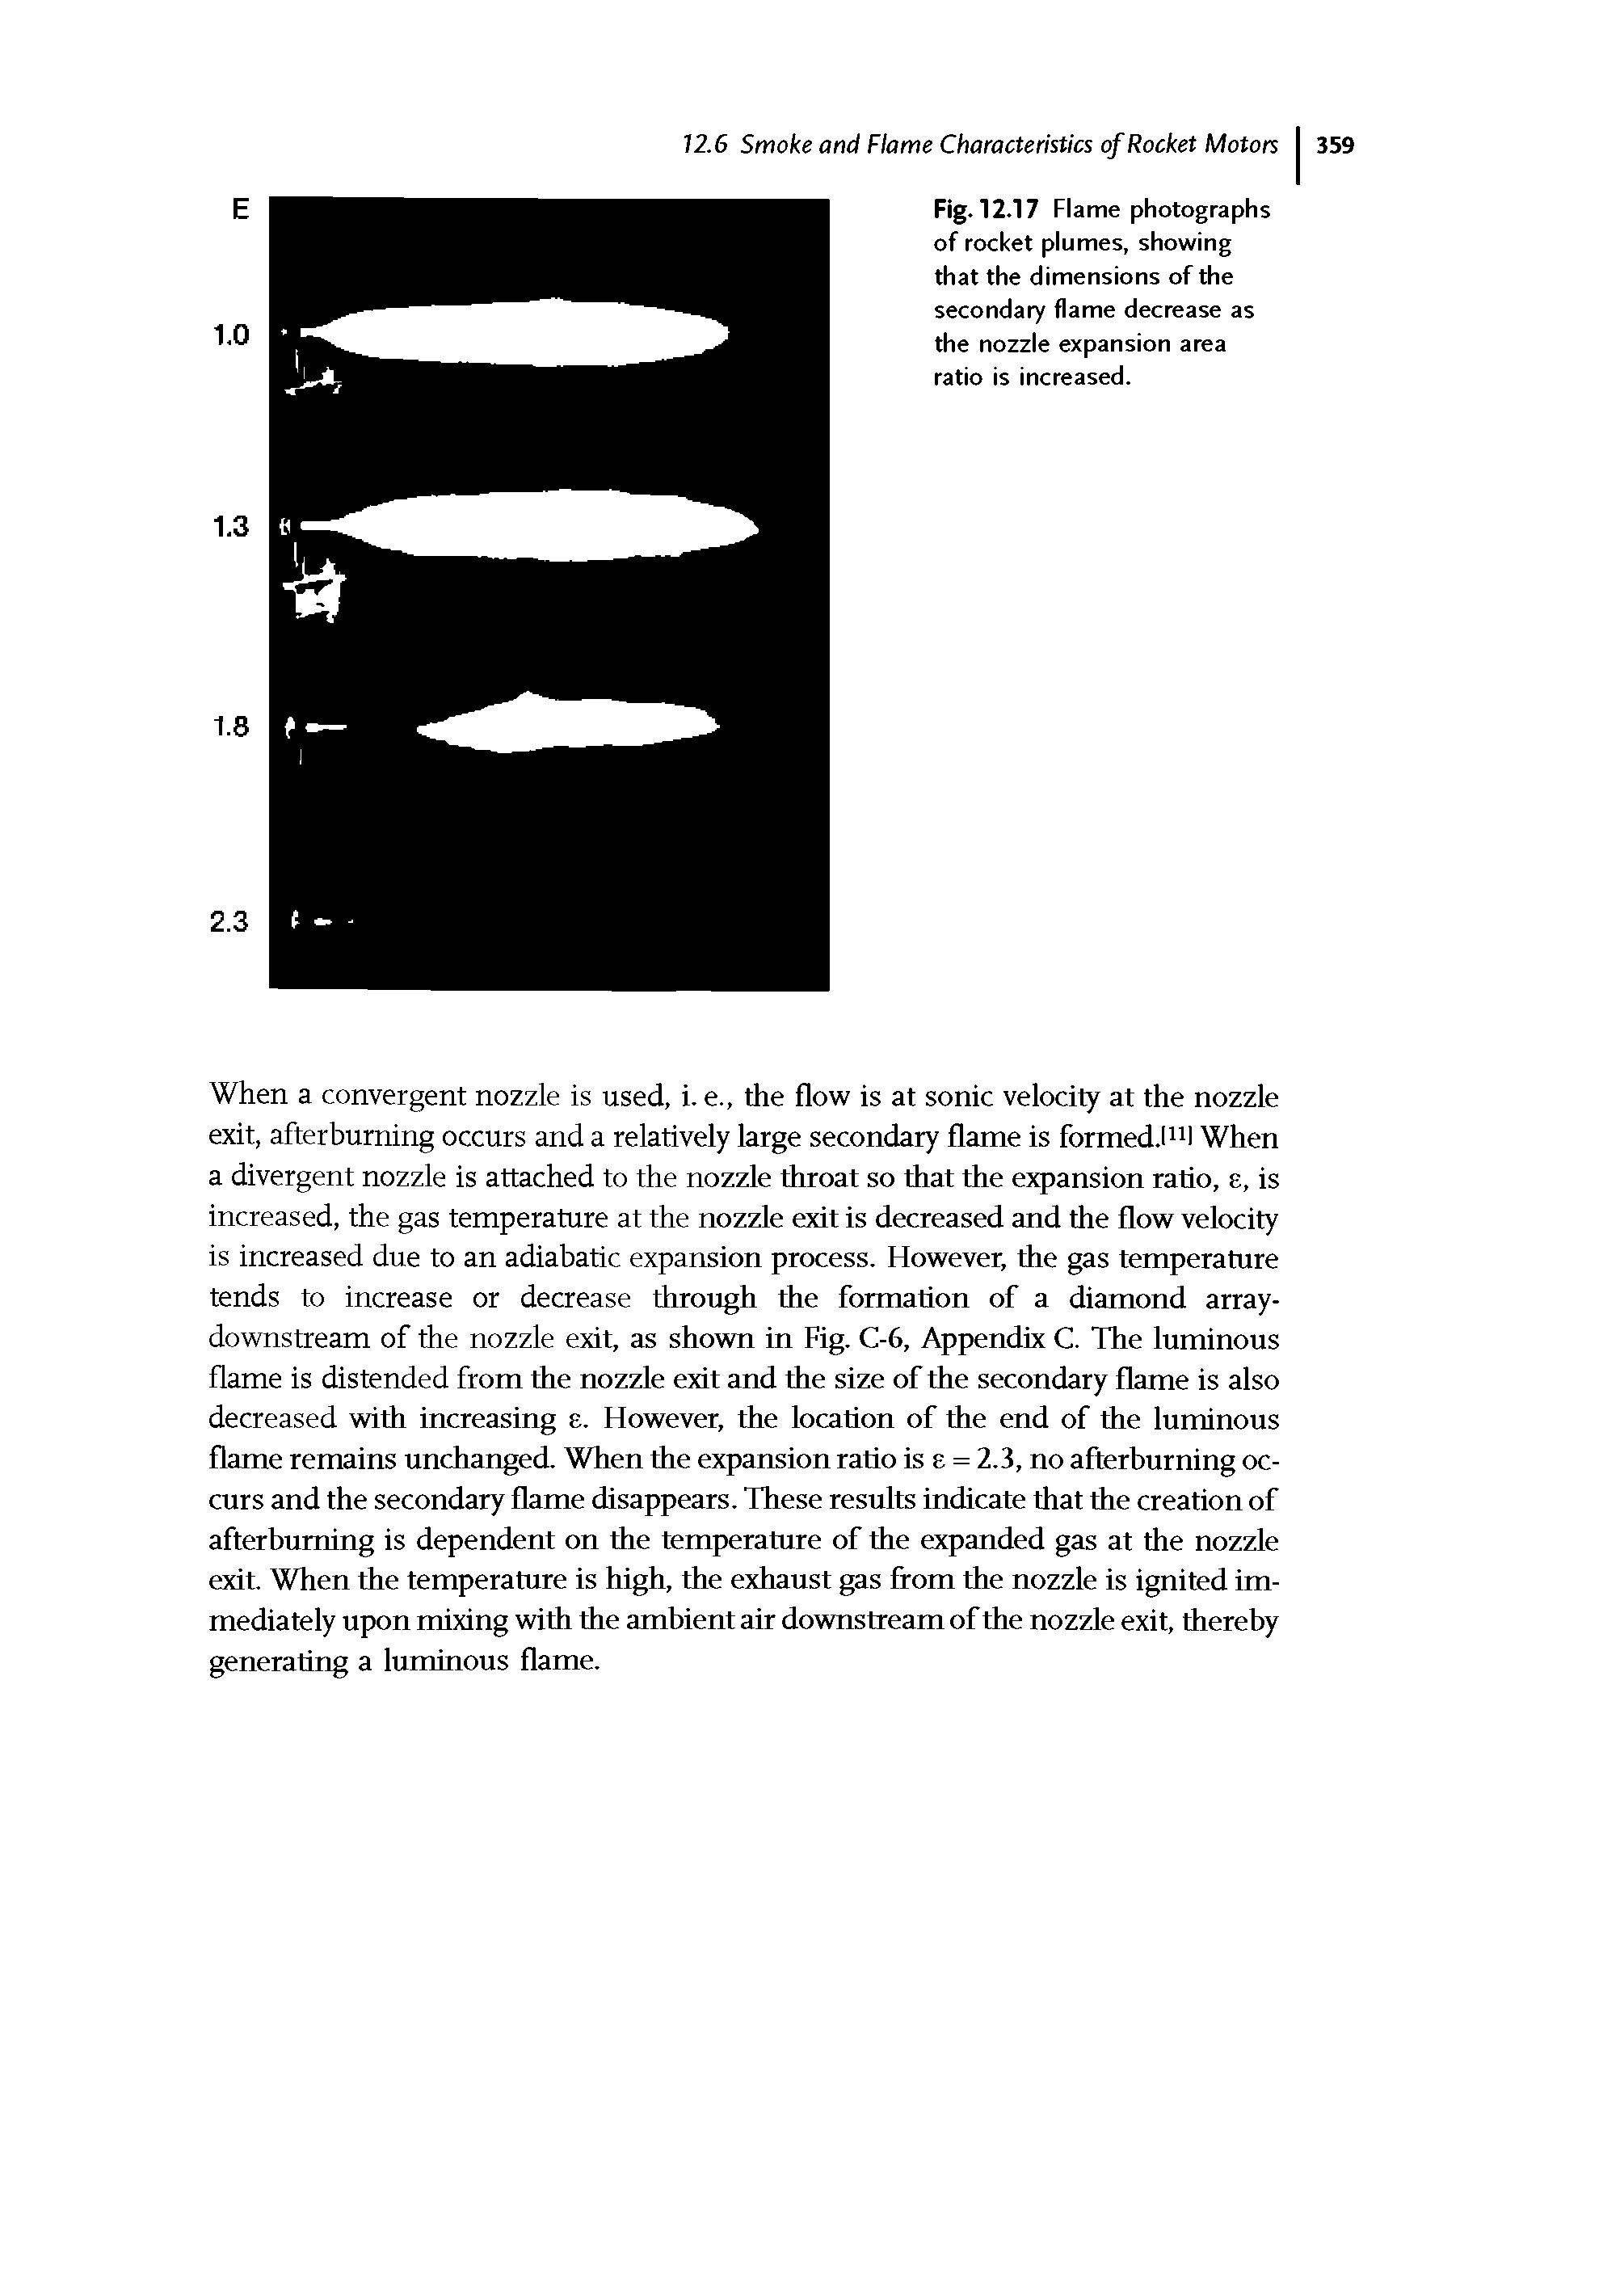 Fig. 12.17 Flame photographs of rocket plumes, showing that the dimensions of the secondary flame decrease as the nozzle expansion area ratio is increased.